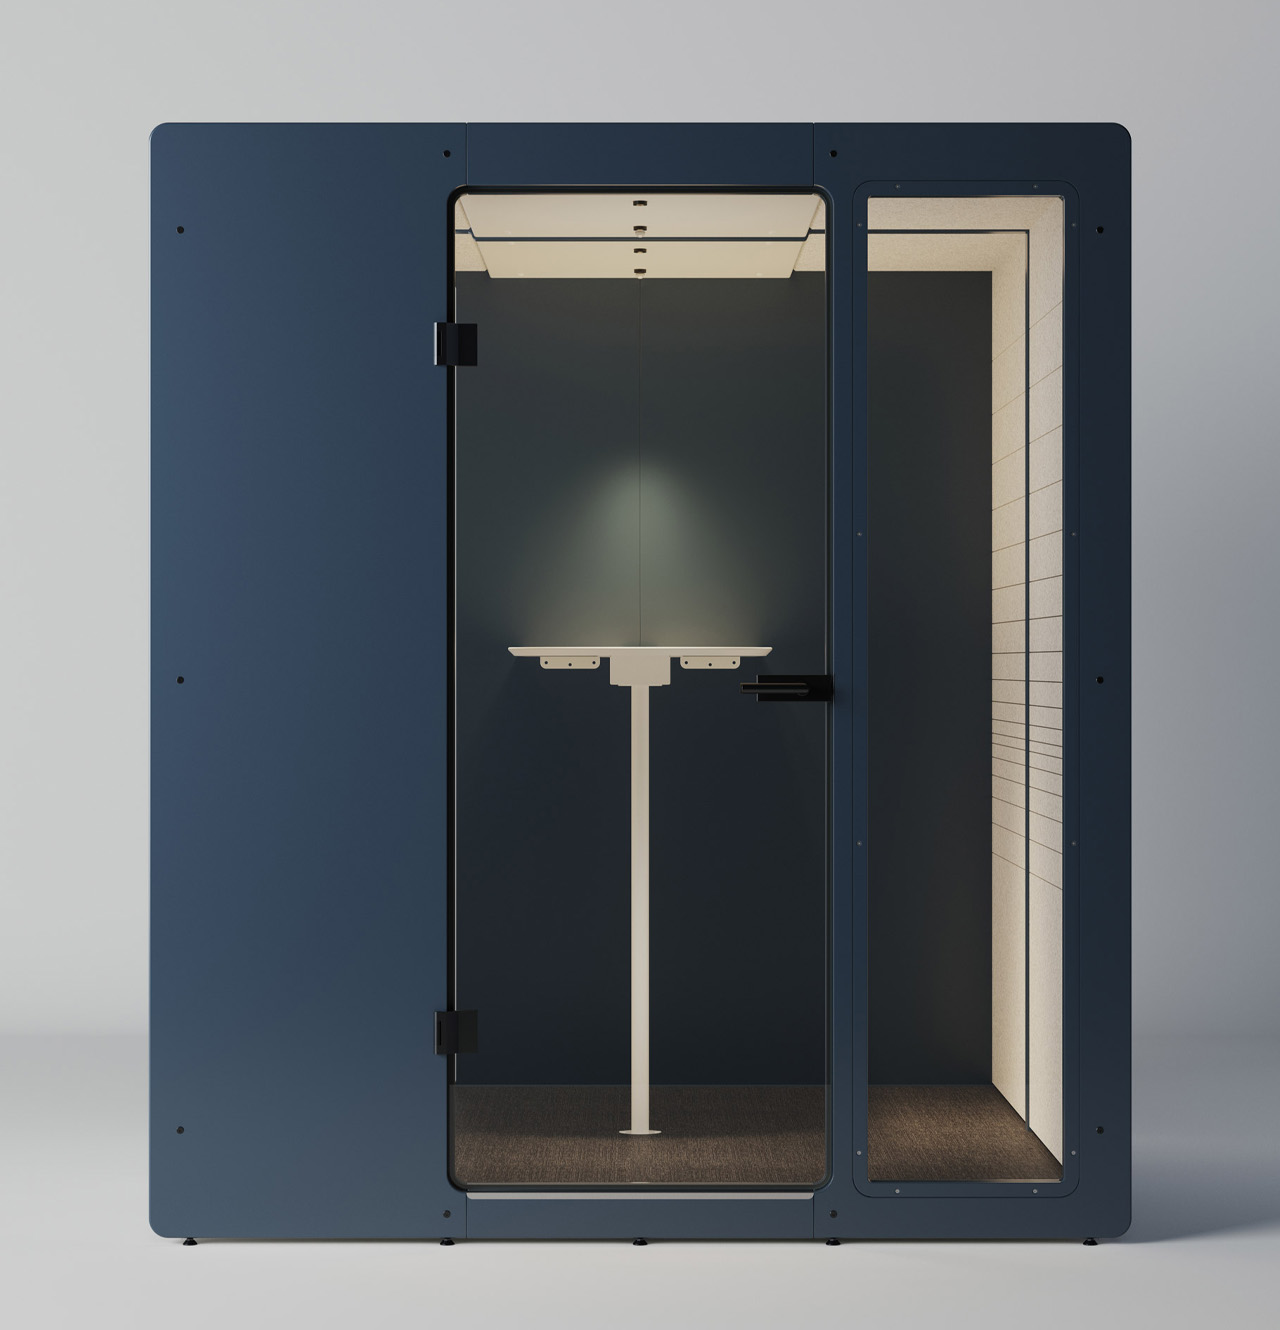 This minimal office booth is “the most sustainable office booth on the market” that can be assembled in 90 minutes